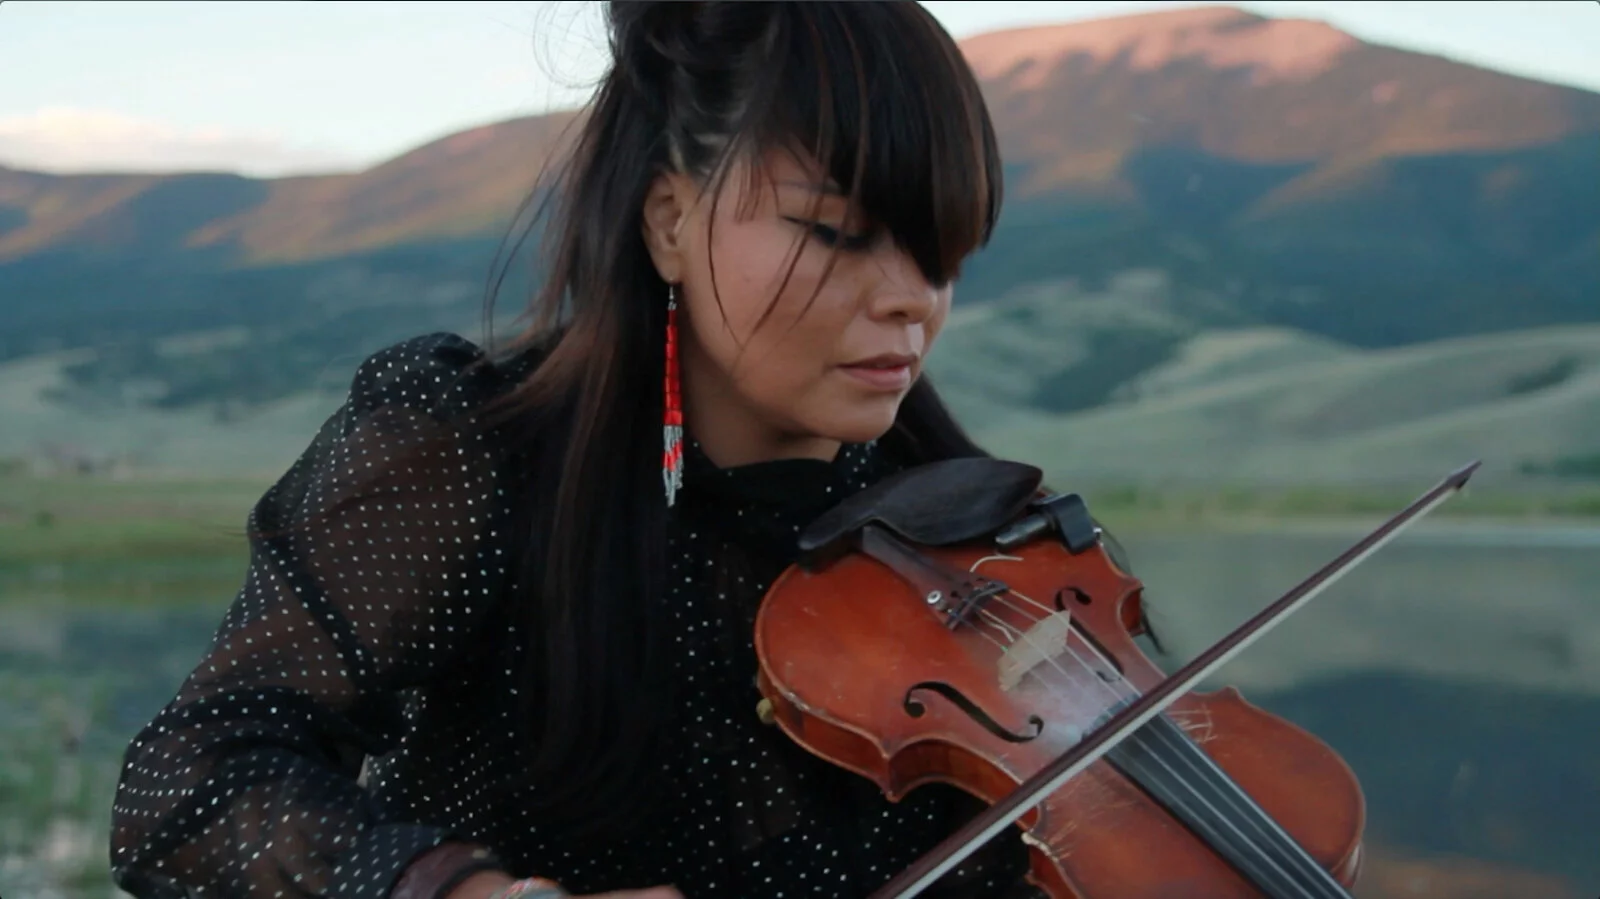 Close up of woman playing violin outdoors